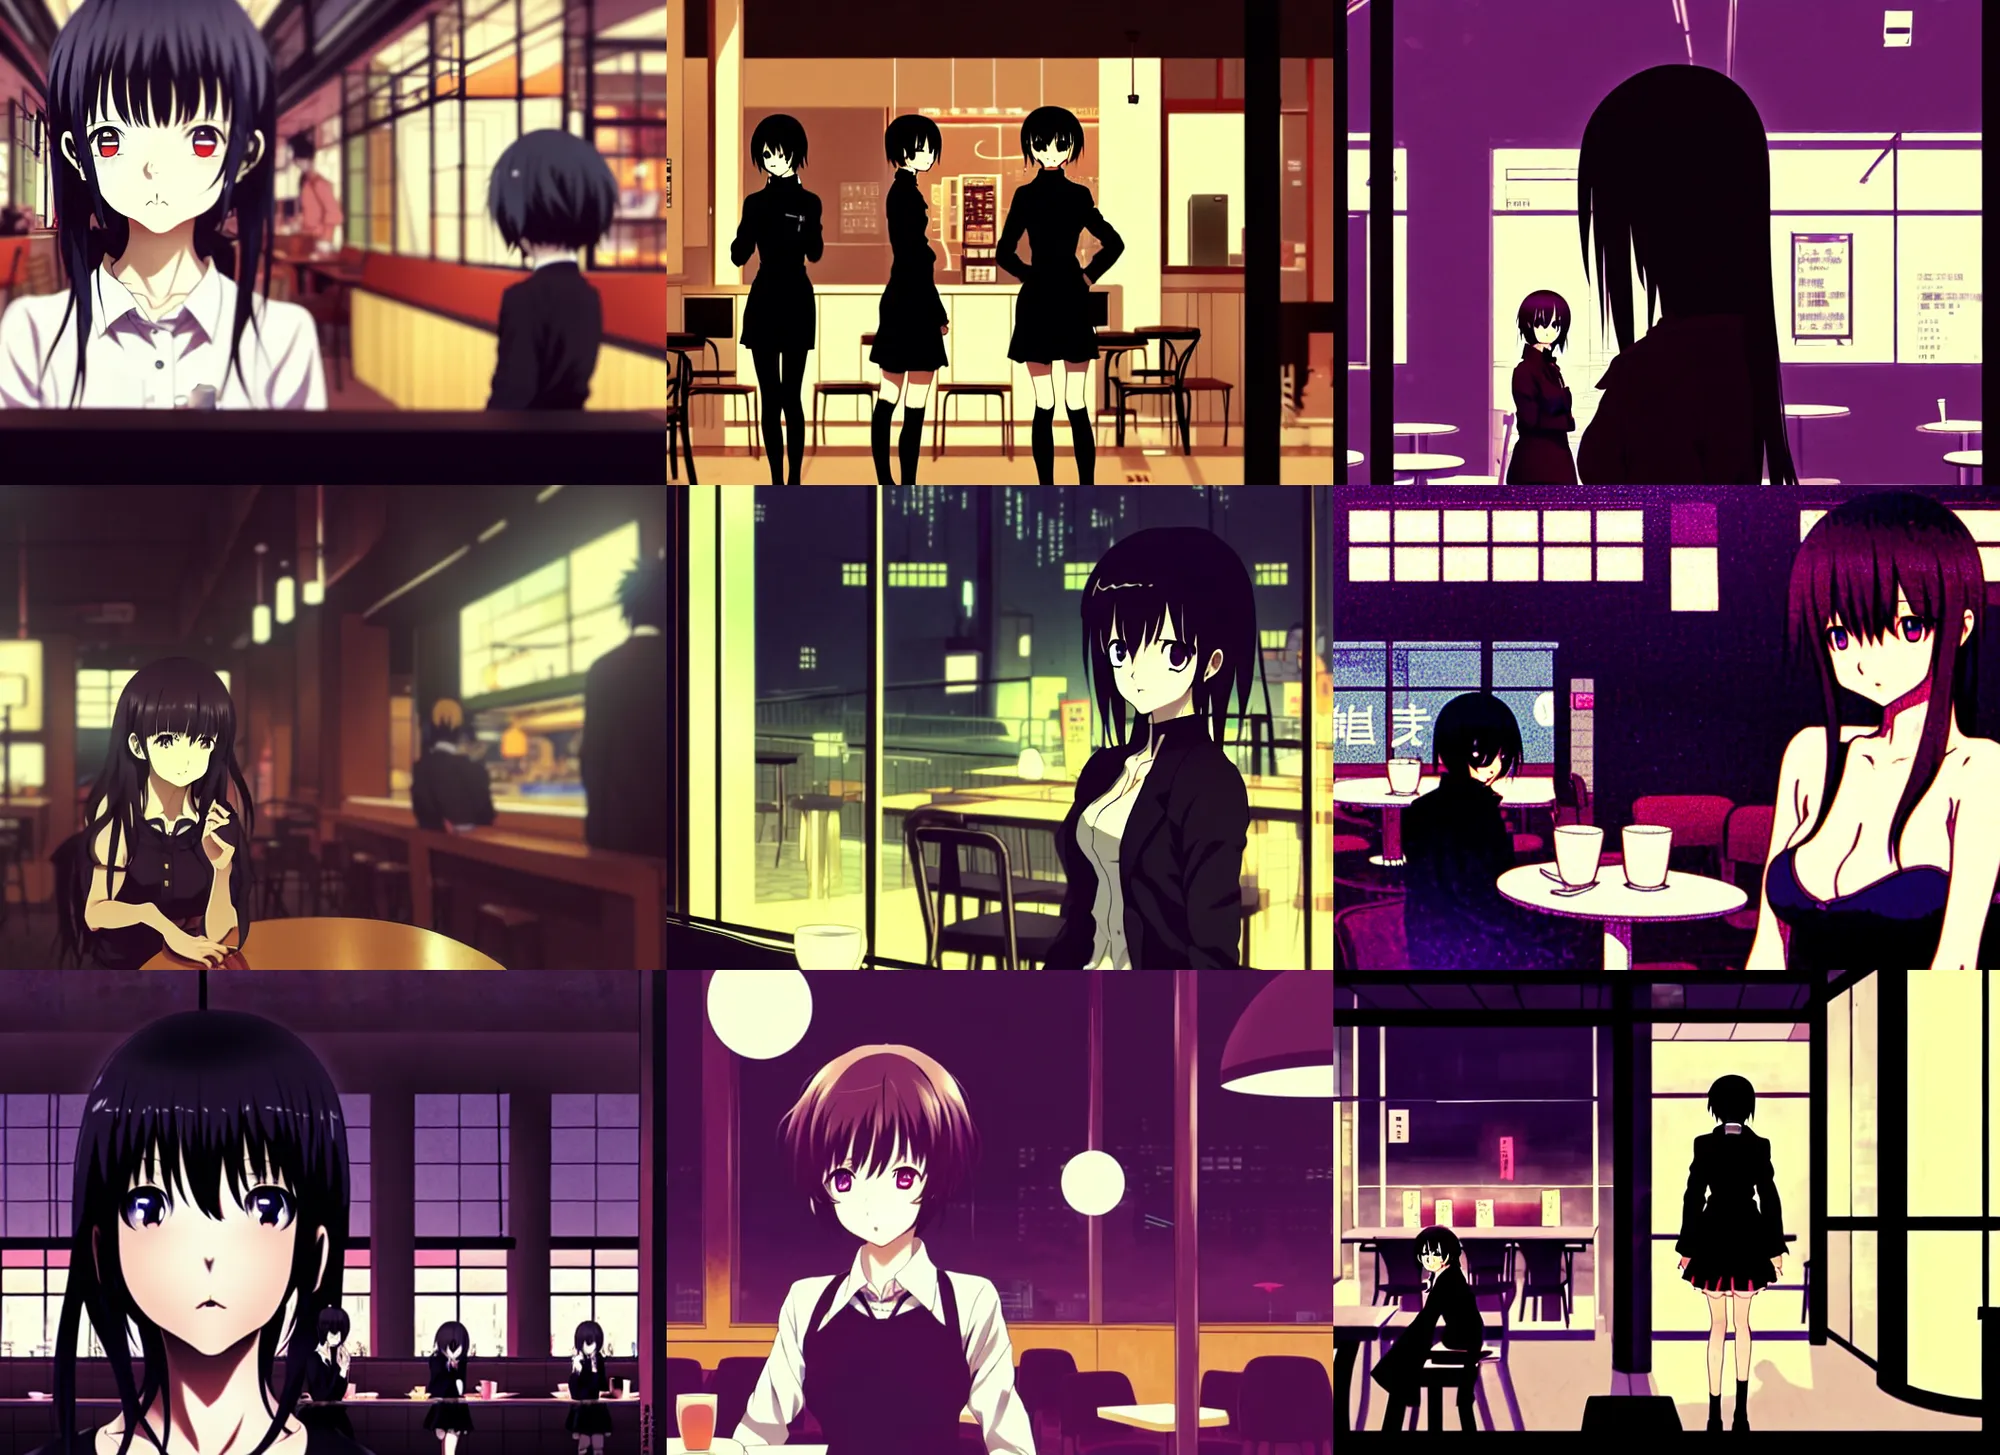 Prompt: anime frames, anime visual, dark portrait of a young female visiting a busy cafe interior at night, very low light, cute face by ilya kuvshinov and, psycho pass, kyoani, dynamic pose, dynamic perspective, strong silhouette, anime cels, rounded eyes, yoshinari yoh, dark tint